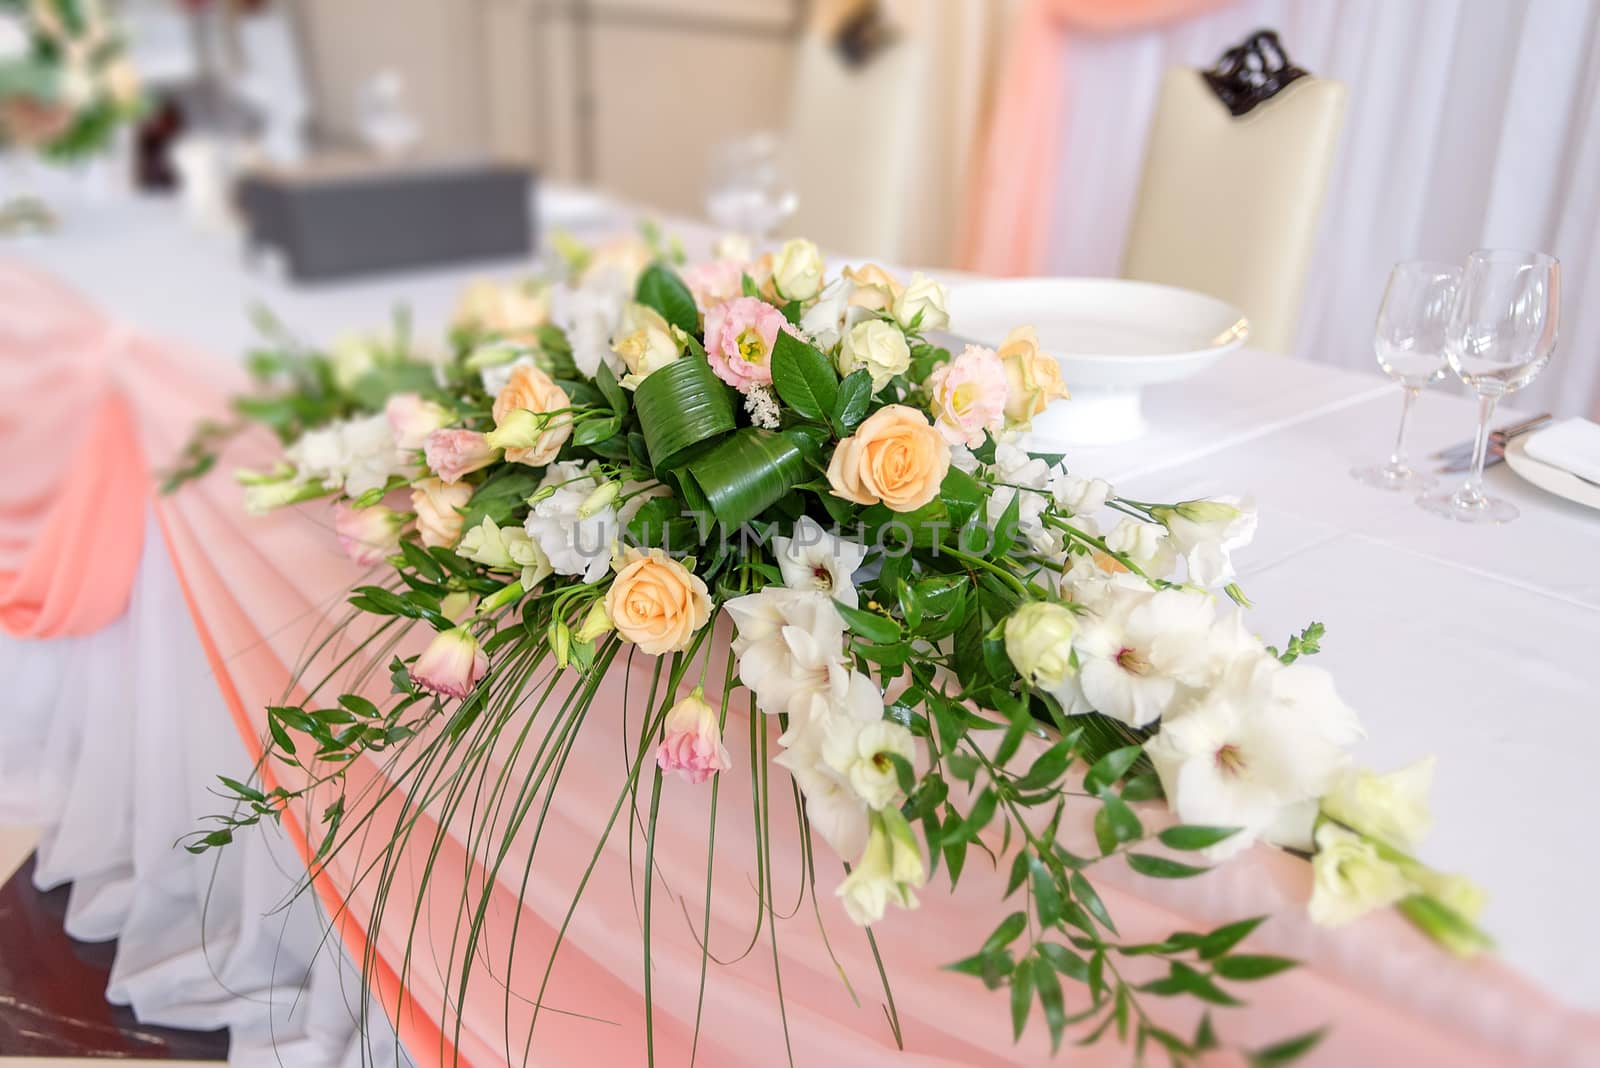 Wedding floral decorations on dinner table covered with peach cloth. Table for the newlyweds. by d_duda